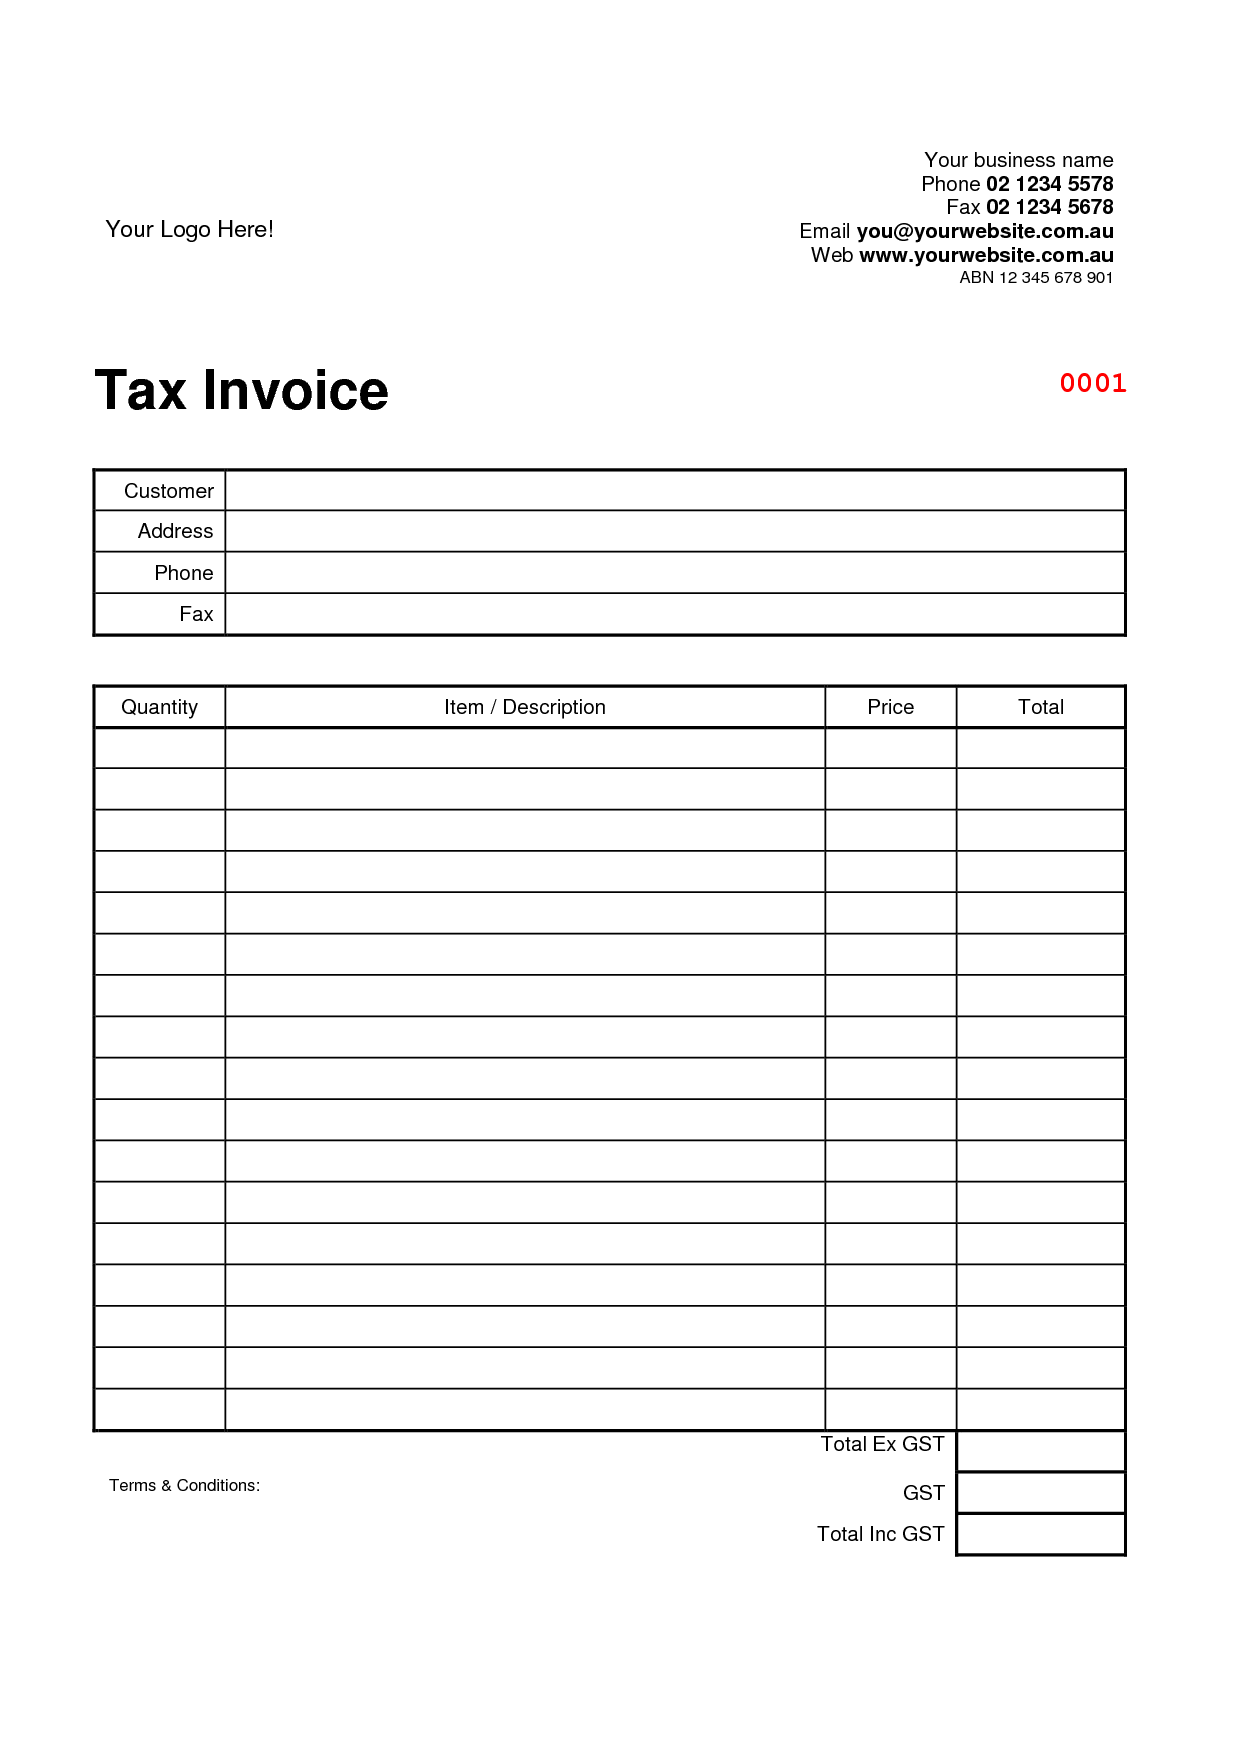 Tax Invoice Template Australia A Step by Step Guide invoice example